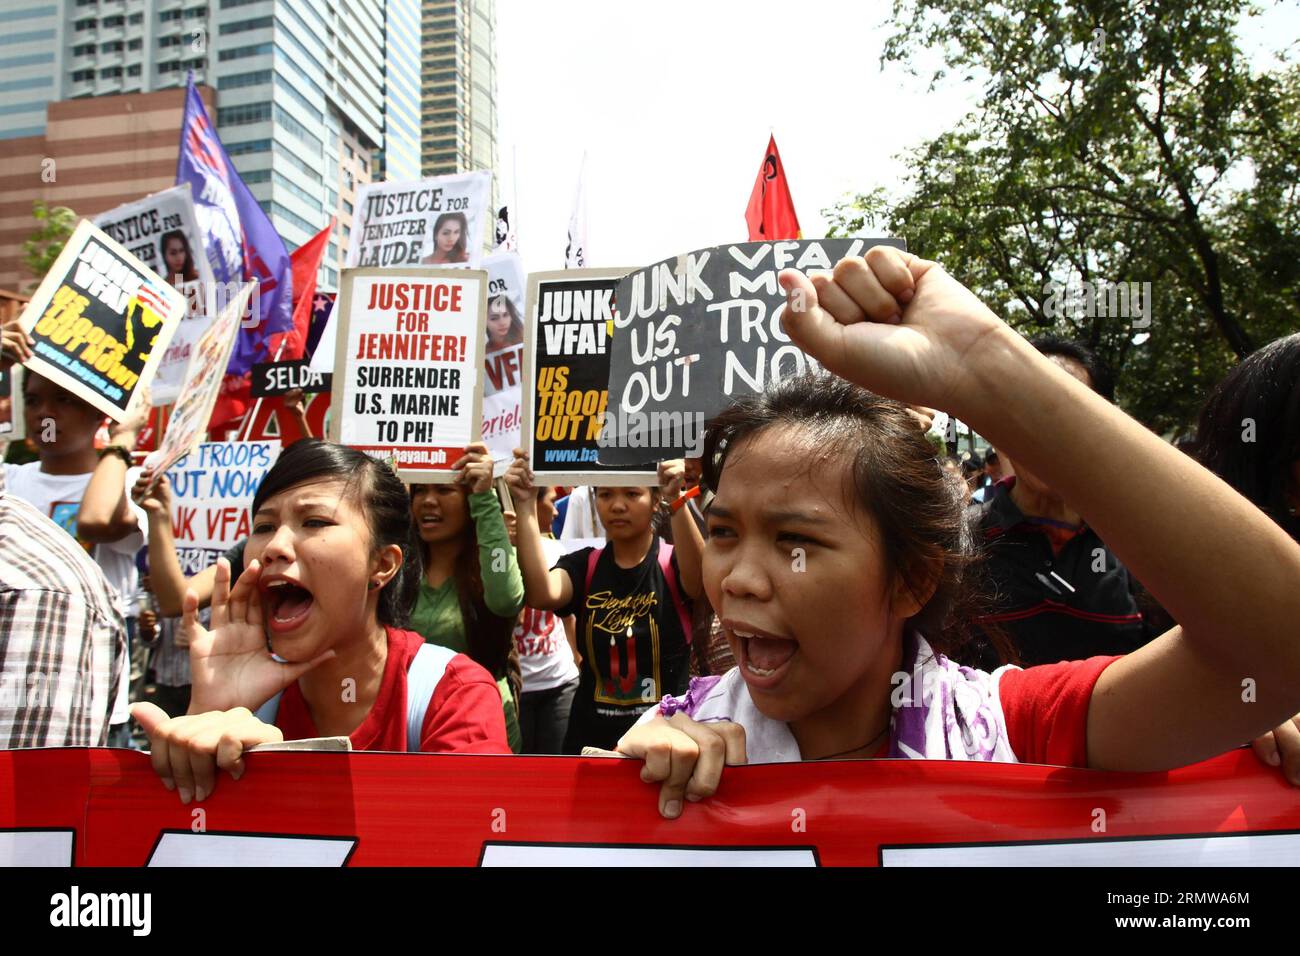 (141016) -- MANILA, Oct. 16, 2014 -- Activists shout slogans during a protest rally in front of the US Embassy in Manila, Philippines, Oct. 16, 2014. The protesters demand justice for Jeffrey Laude, who was suspected to be killed by US Marine Joseph Scott Pemberton last Saturday in Olongapo City. ) PHILIPPINES-MANILA-PROTEST RALLY RouellexUmali PUBLICATIONxNOTxINxCHN   Manila OCT 16 2014 activists Shout Slogans during a Protest Rally in Front of The U.S. Embassy in Manila Philippines OCT 16 2014 The protesters Demand Justice for Jeffrey Laude Who what suspected to Be KILLED by U.S. Navy Joseph Stock Photo